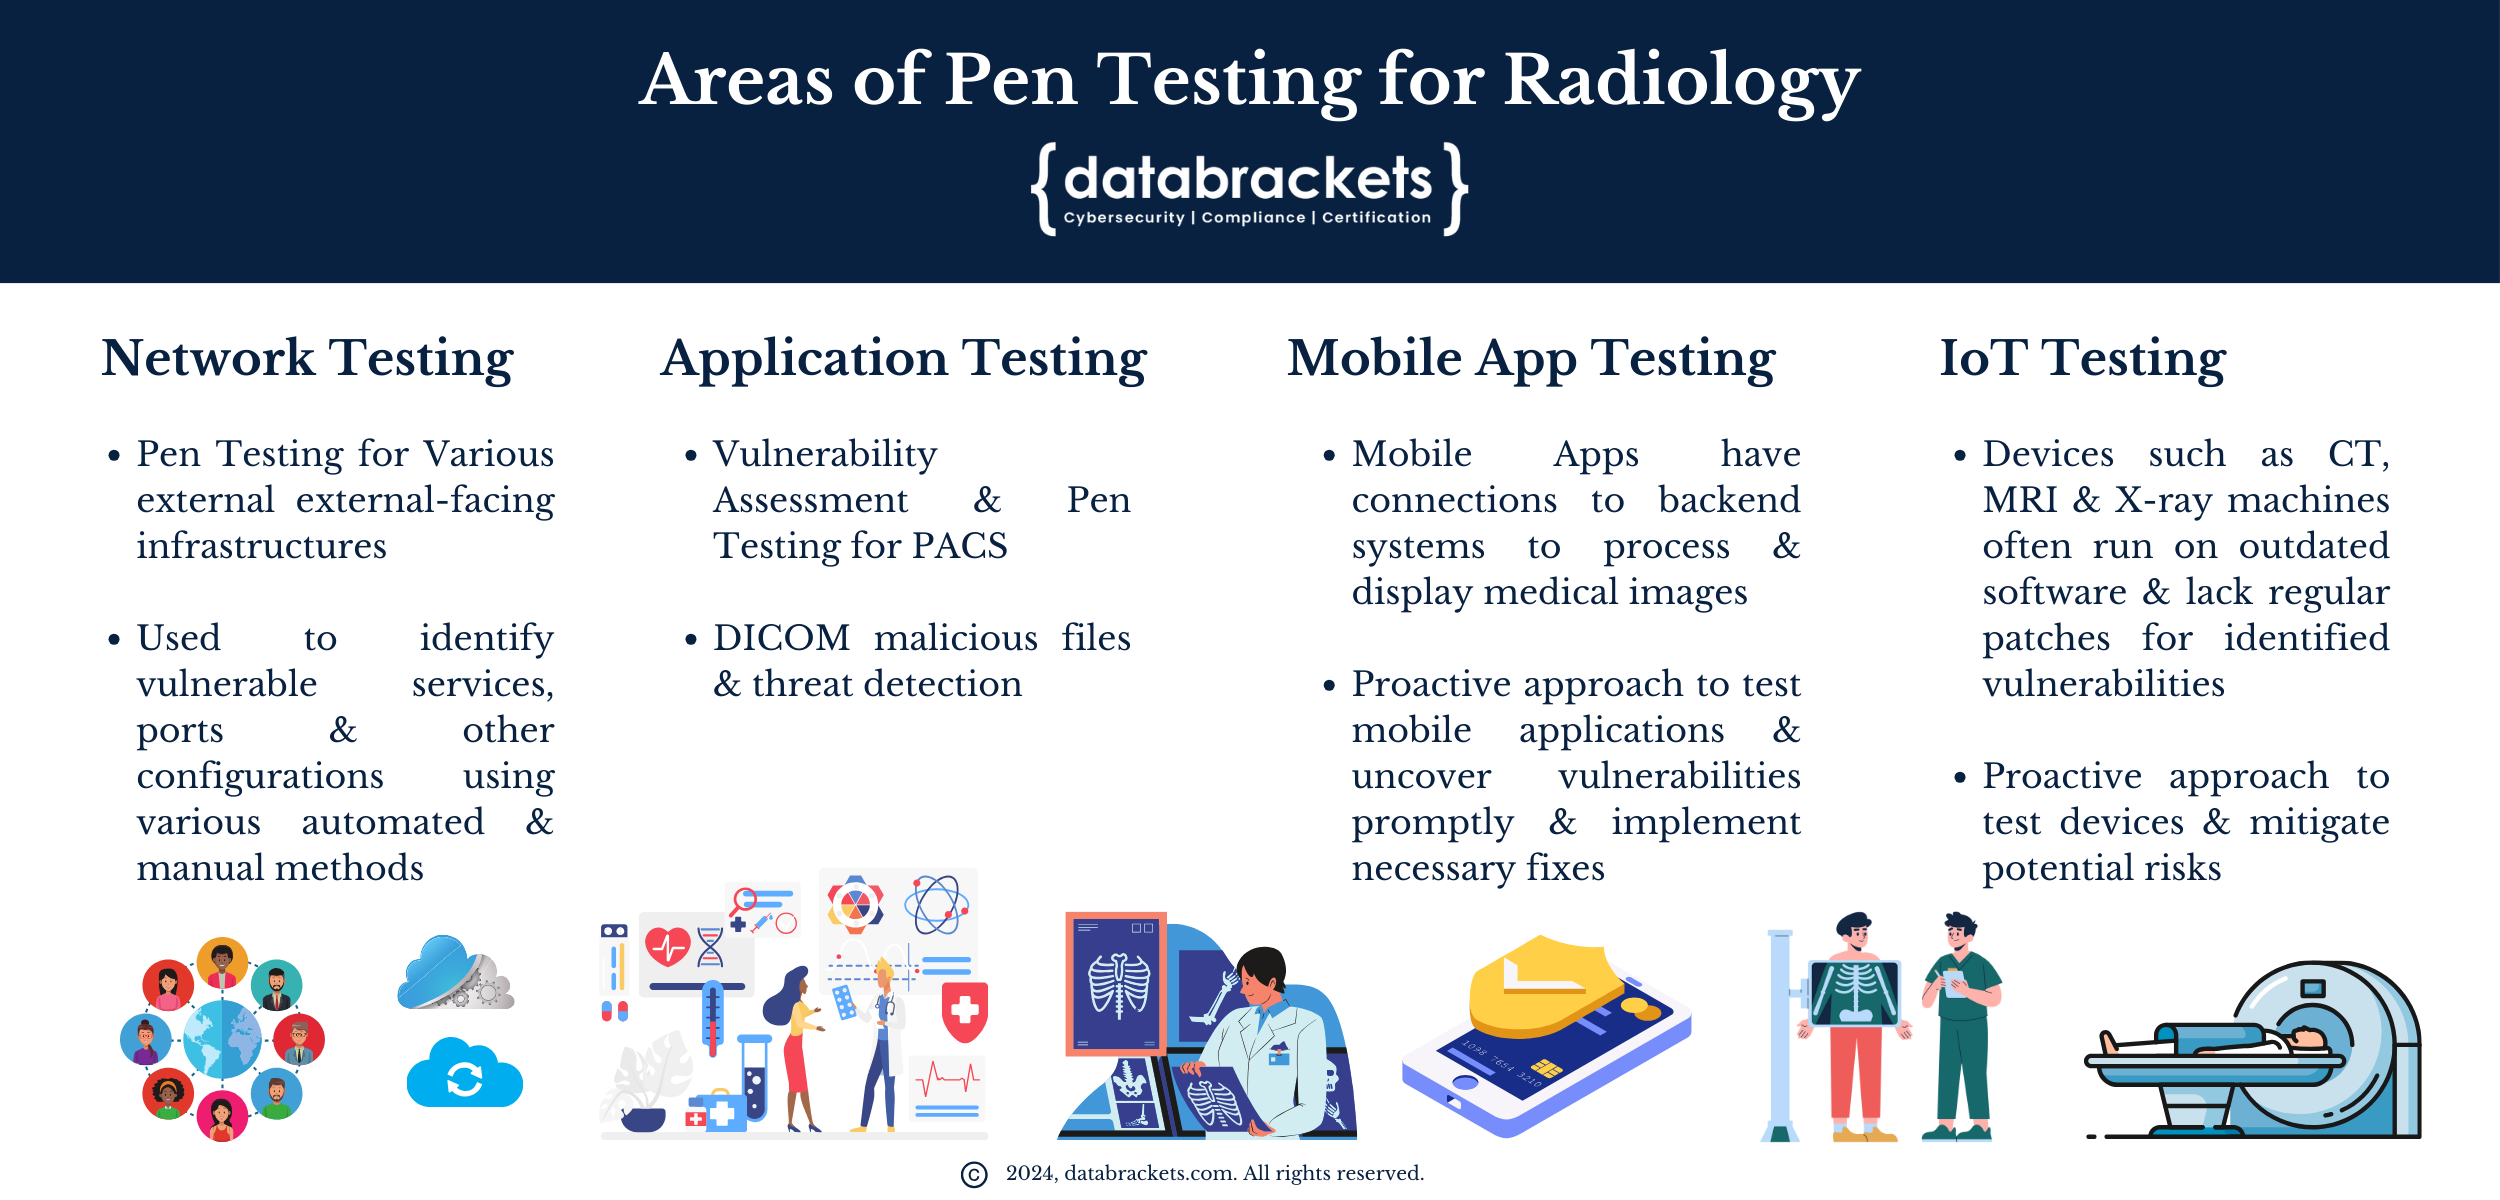 4 areas of penetration testing for radiology